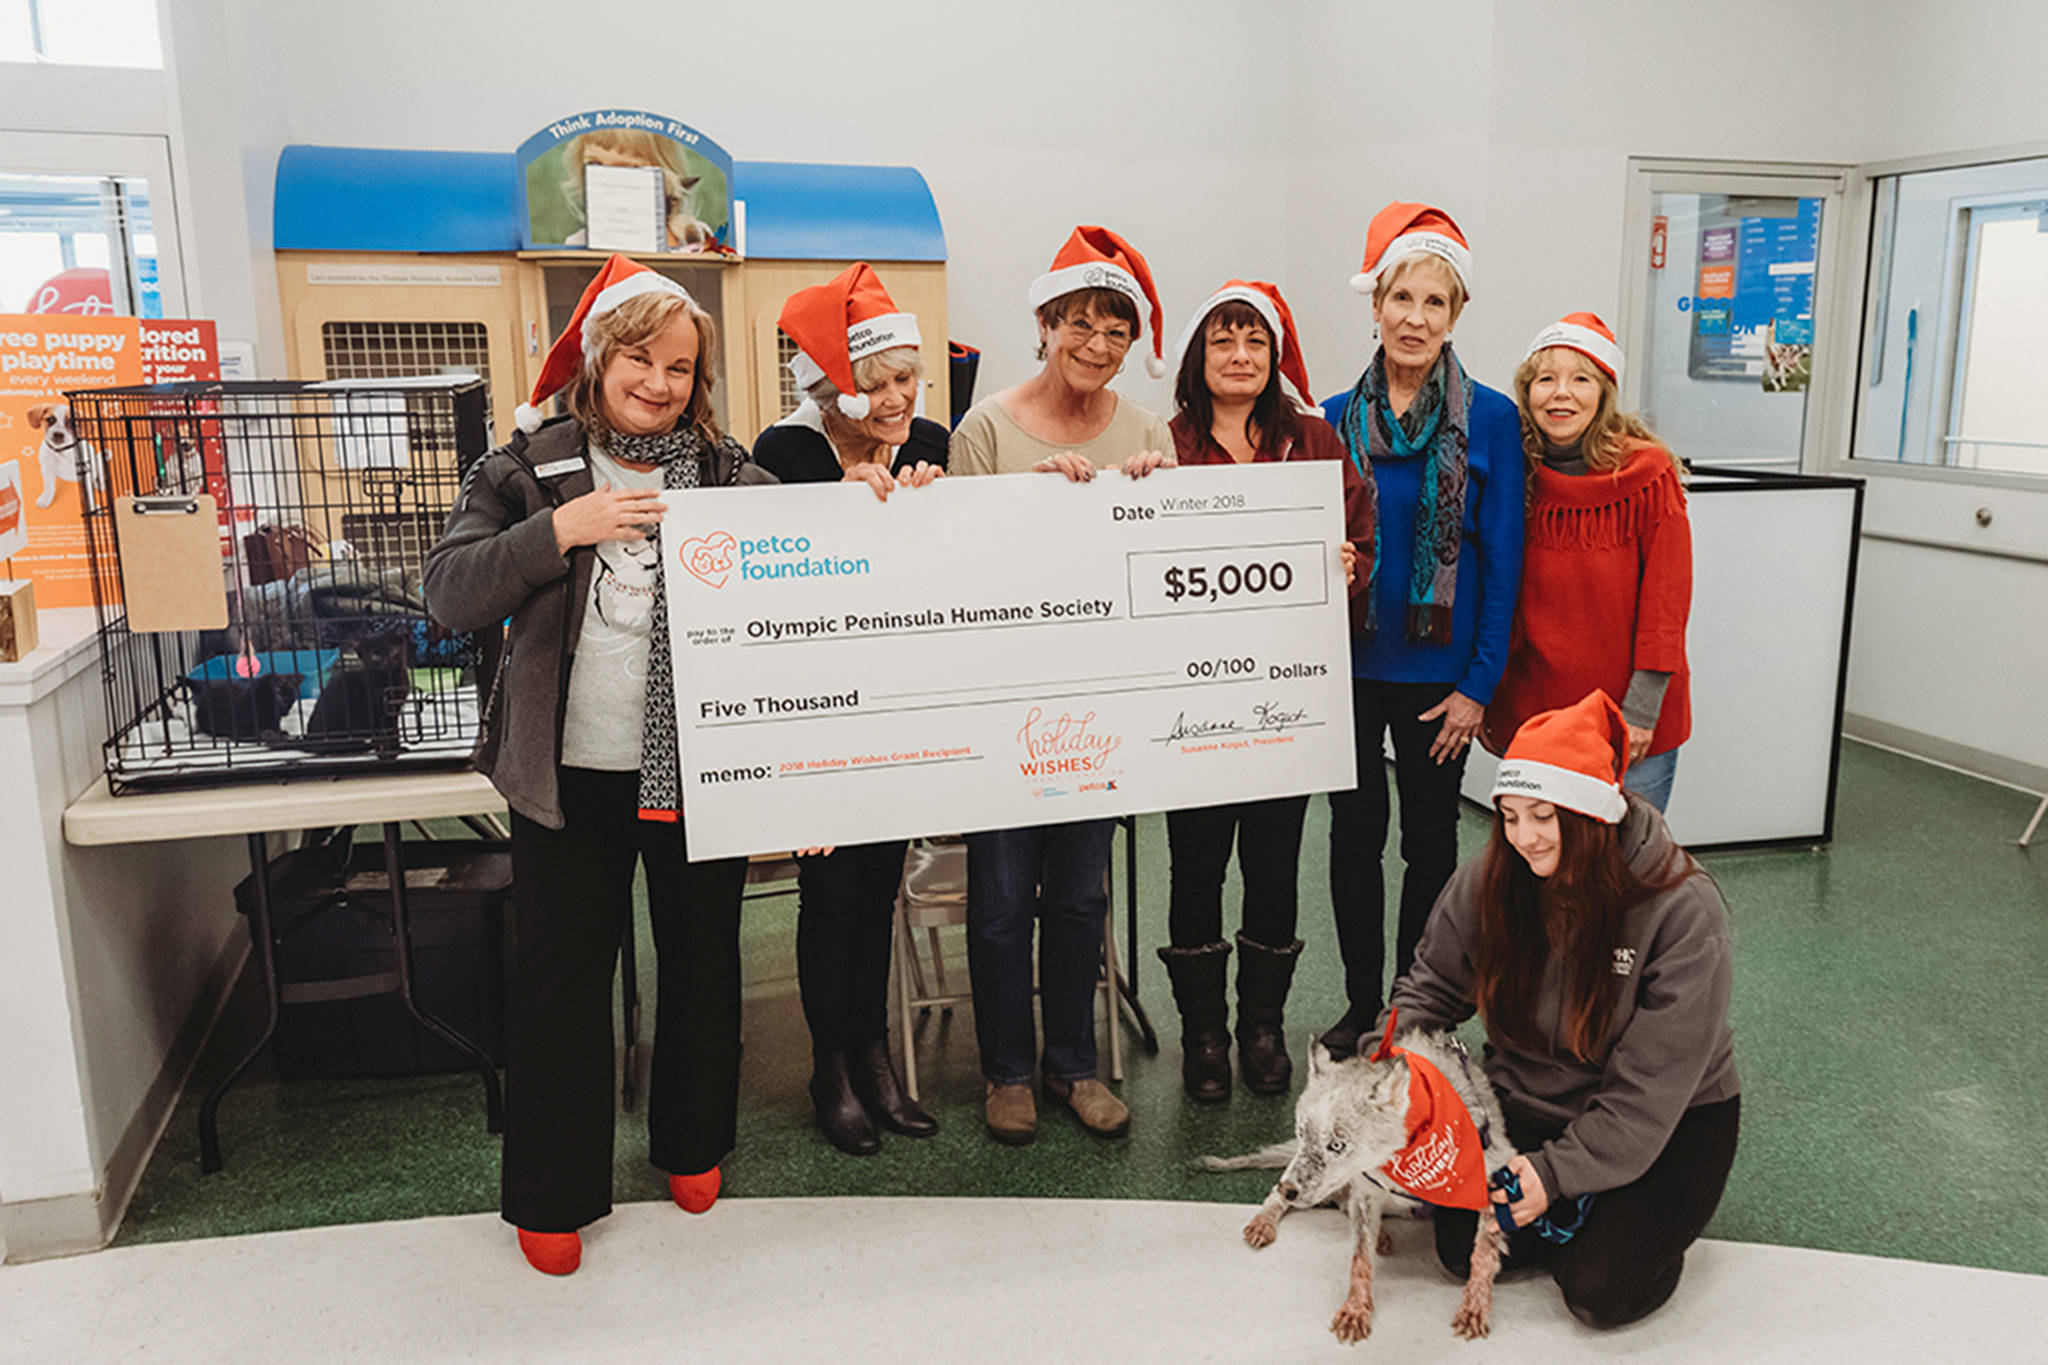 The Petco Foundation awarded the Olympic Peninsula Humane Society (OPHS) a $5,000 grant through the Foundation’s sixth annual Holiday Wishes campaign, an opportunity for individuals or organizations around the country to share how an adopted pet has changed their lives. From left, OPHS Executive Director, Luanne Hinkle, Linda Crow, Becky Upton, Denise Foley, Donna Halsaver, Theresa Killgore, and Brooke Horn hold the grant check at the Sequim Petco on Dec. 1. Photo courtesy of Brandie Ballard Photography